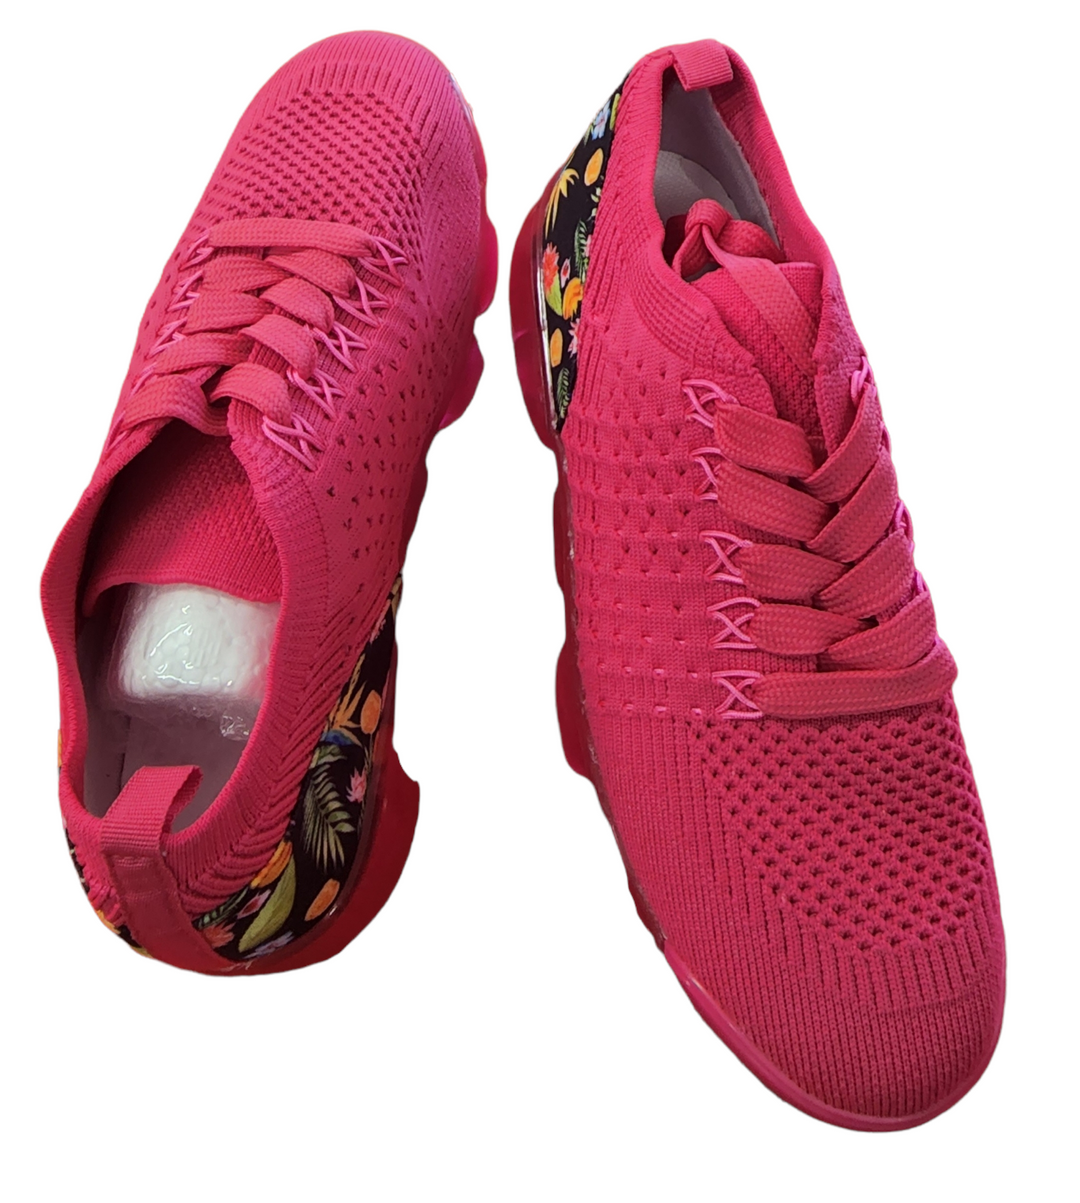 Ladies Fashionable Sneaker With Flower Trim